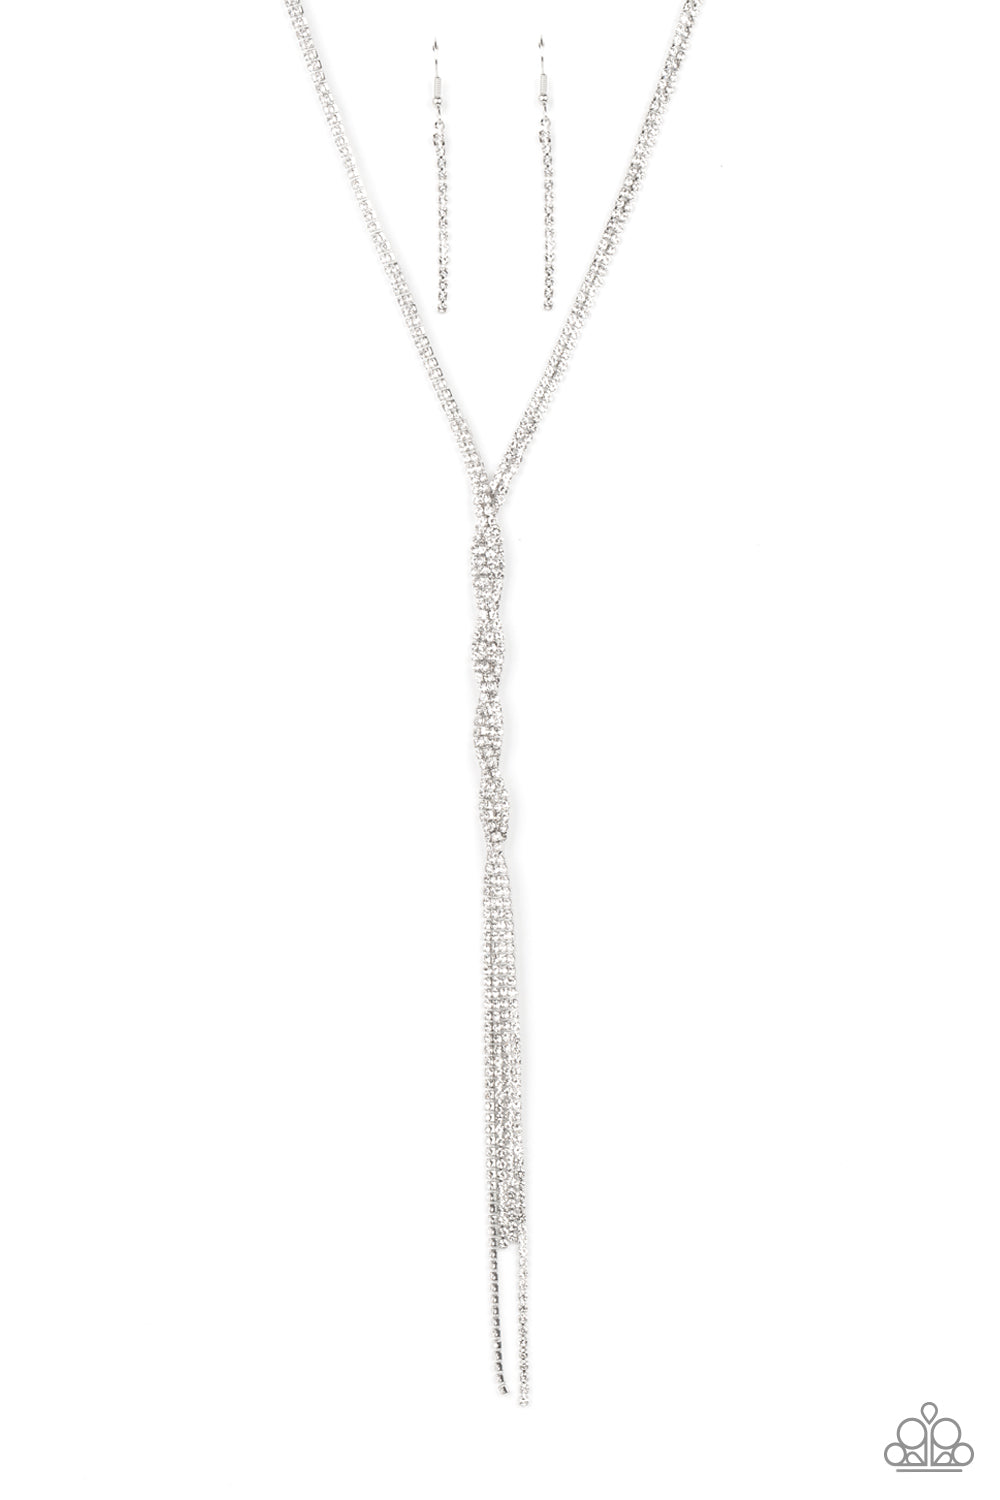 Impressively Icy White Necklace - Paparazzi Accessories  Silvery ribbons of glassy white rhinestones loop around the neck and delicately twist into an icy tassel down the chest. Features an adjustable clasp closure.  Sold as one individual necklace. Includes one pair of matching earrings.